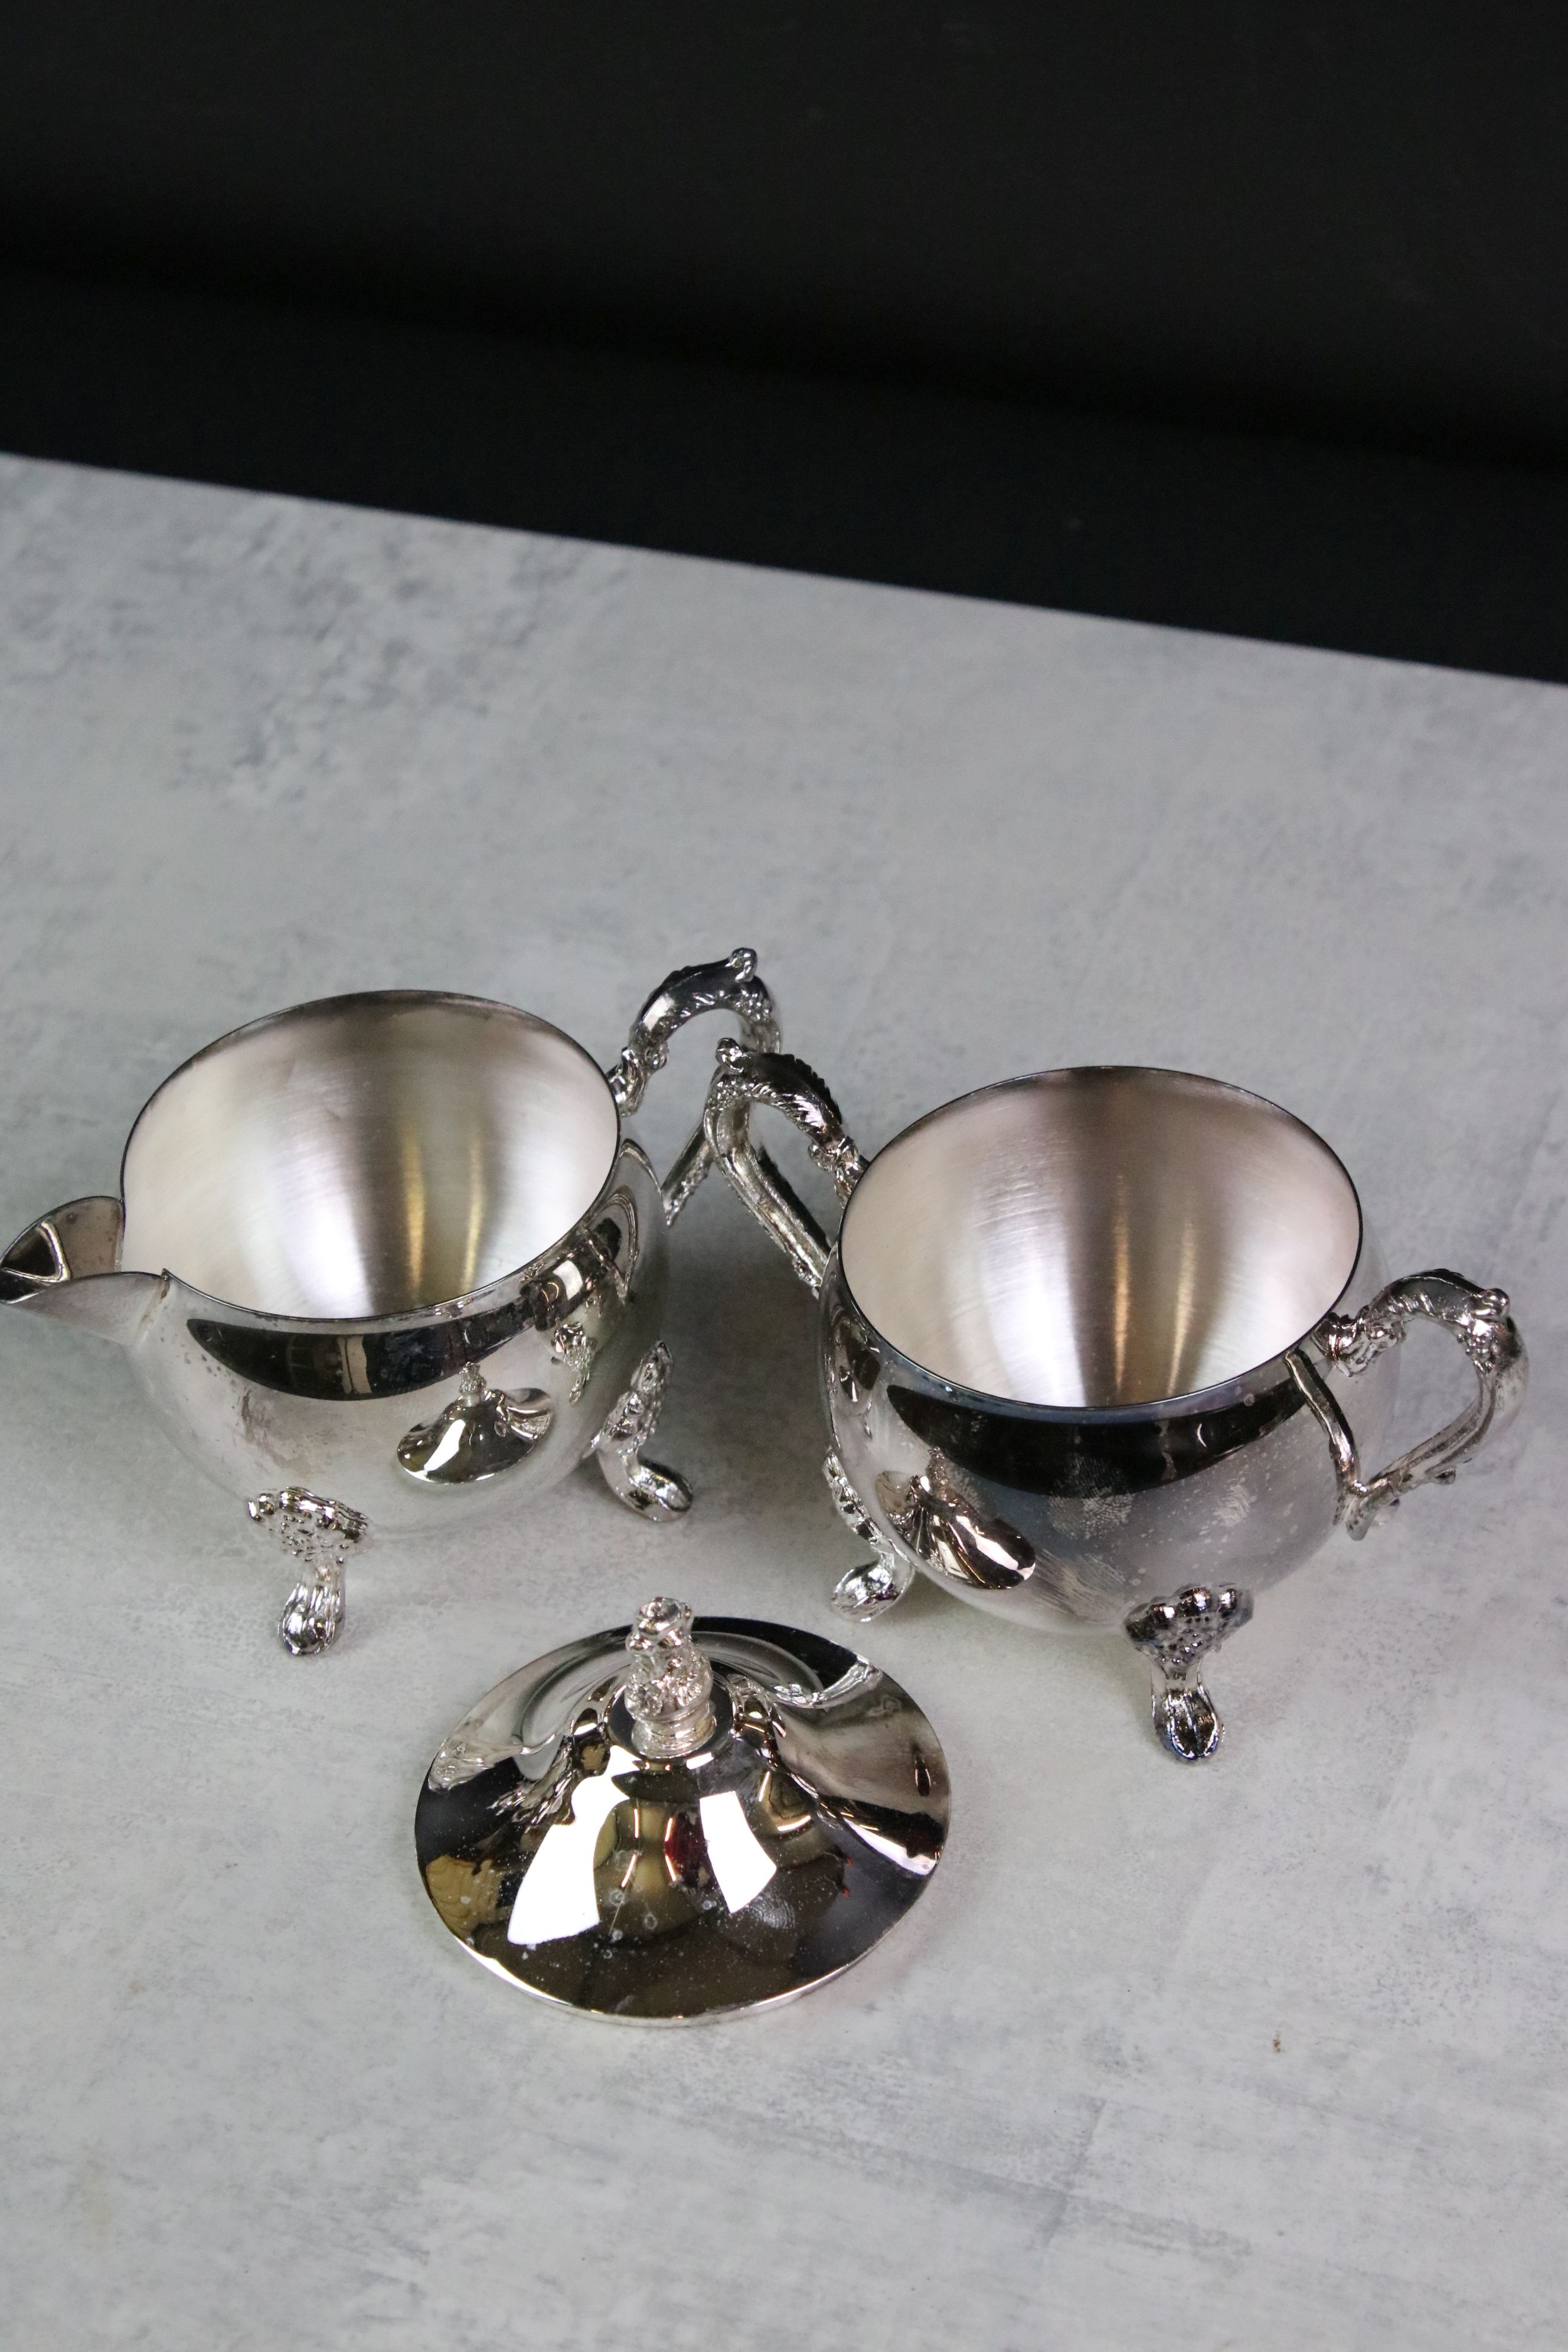 Silver Plated Five piece Tea and Coffee Set, new in box - Image 7 of 7